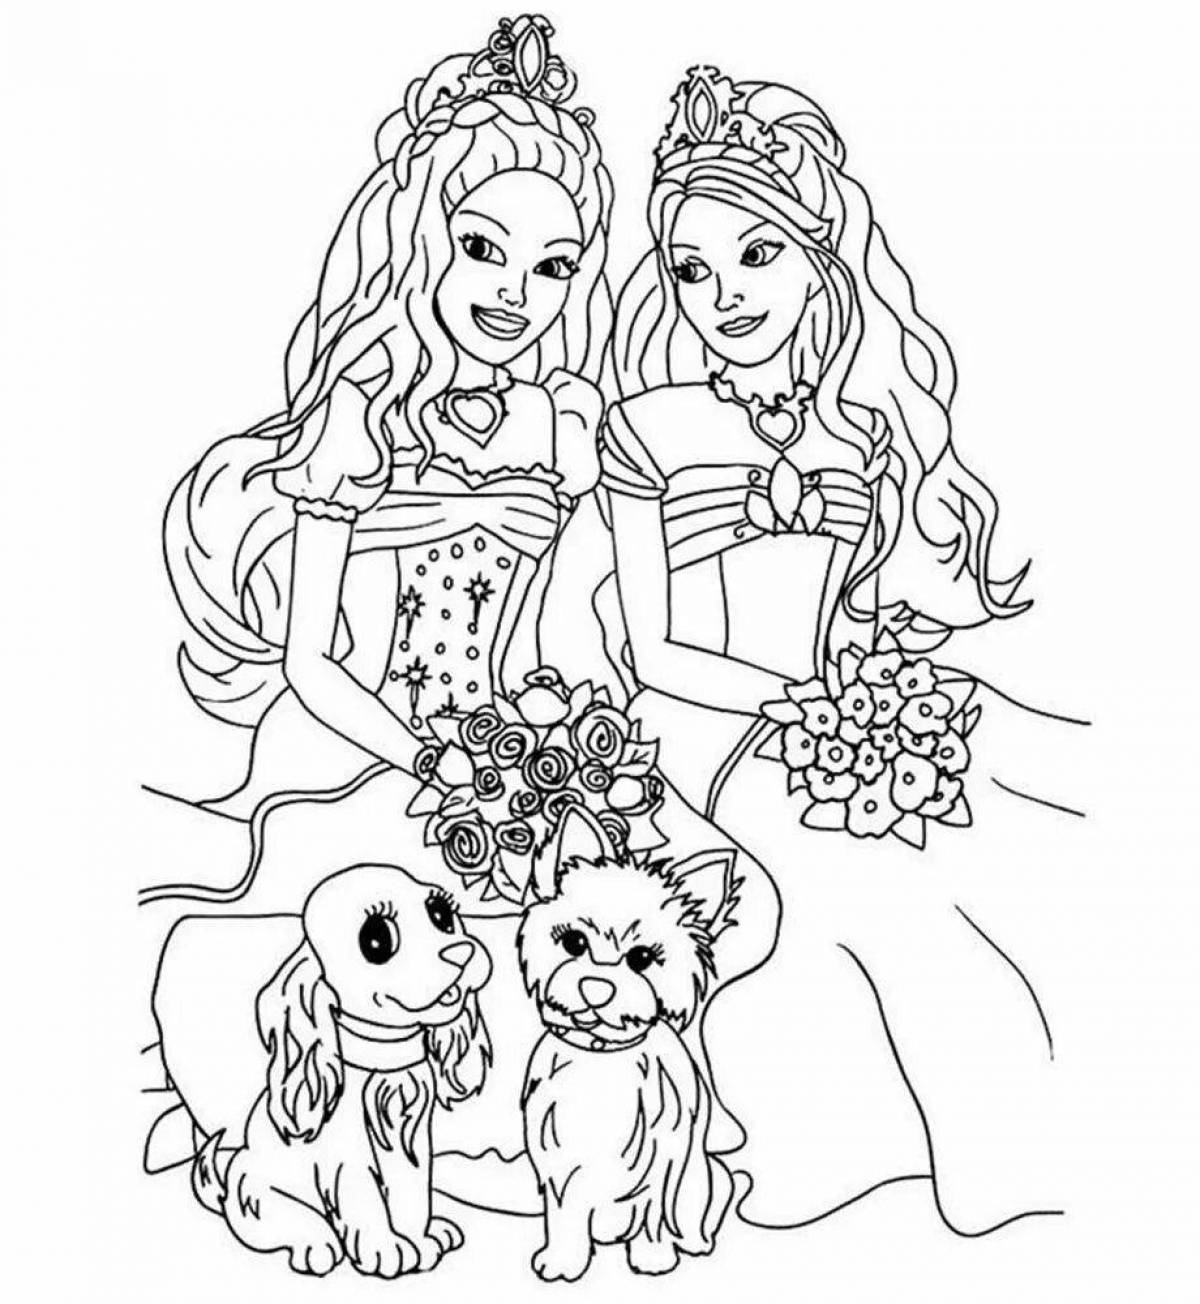 Fun coloring book Barbie with a dog